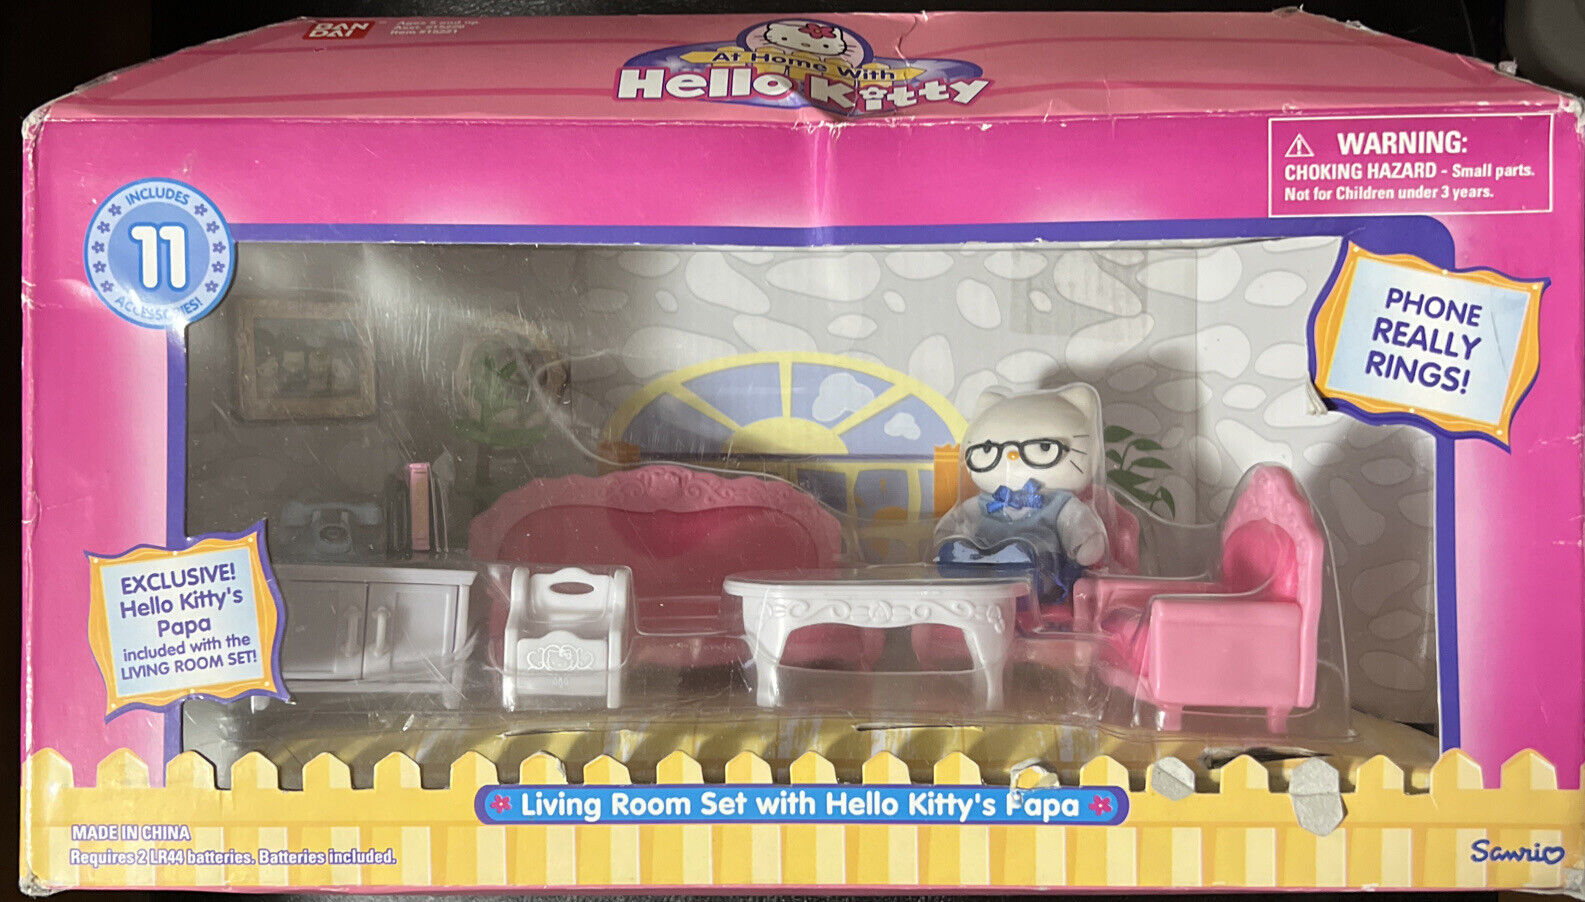 Bandai At Home With Hello Kitty Living Room Set With Hello Kitty\'s Papa Playset